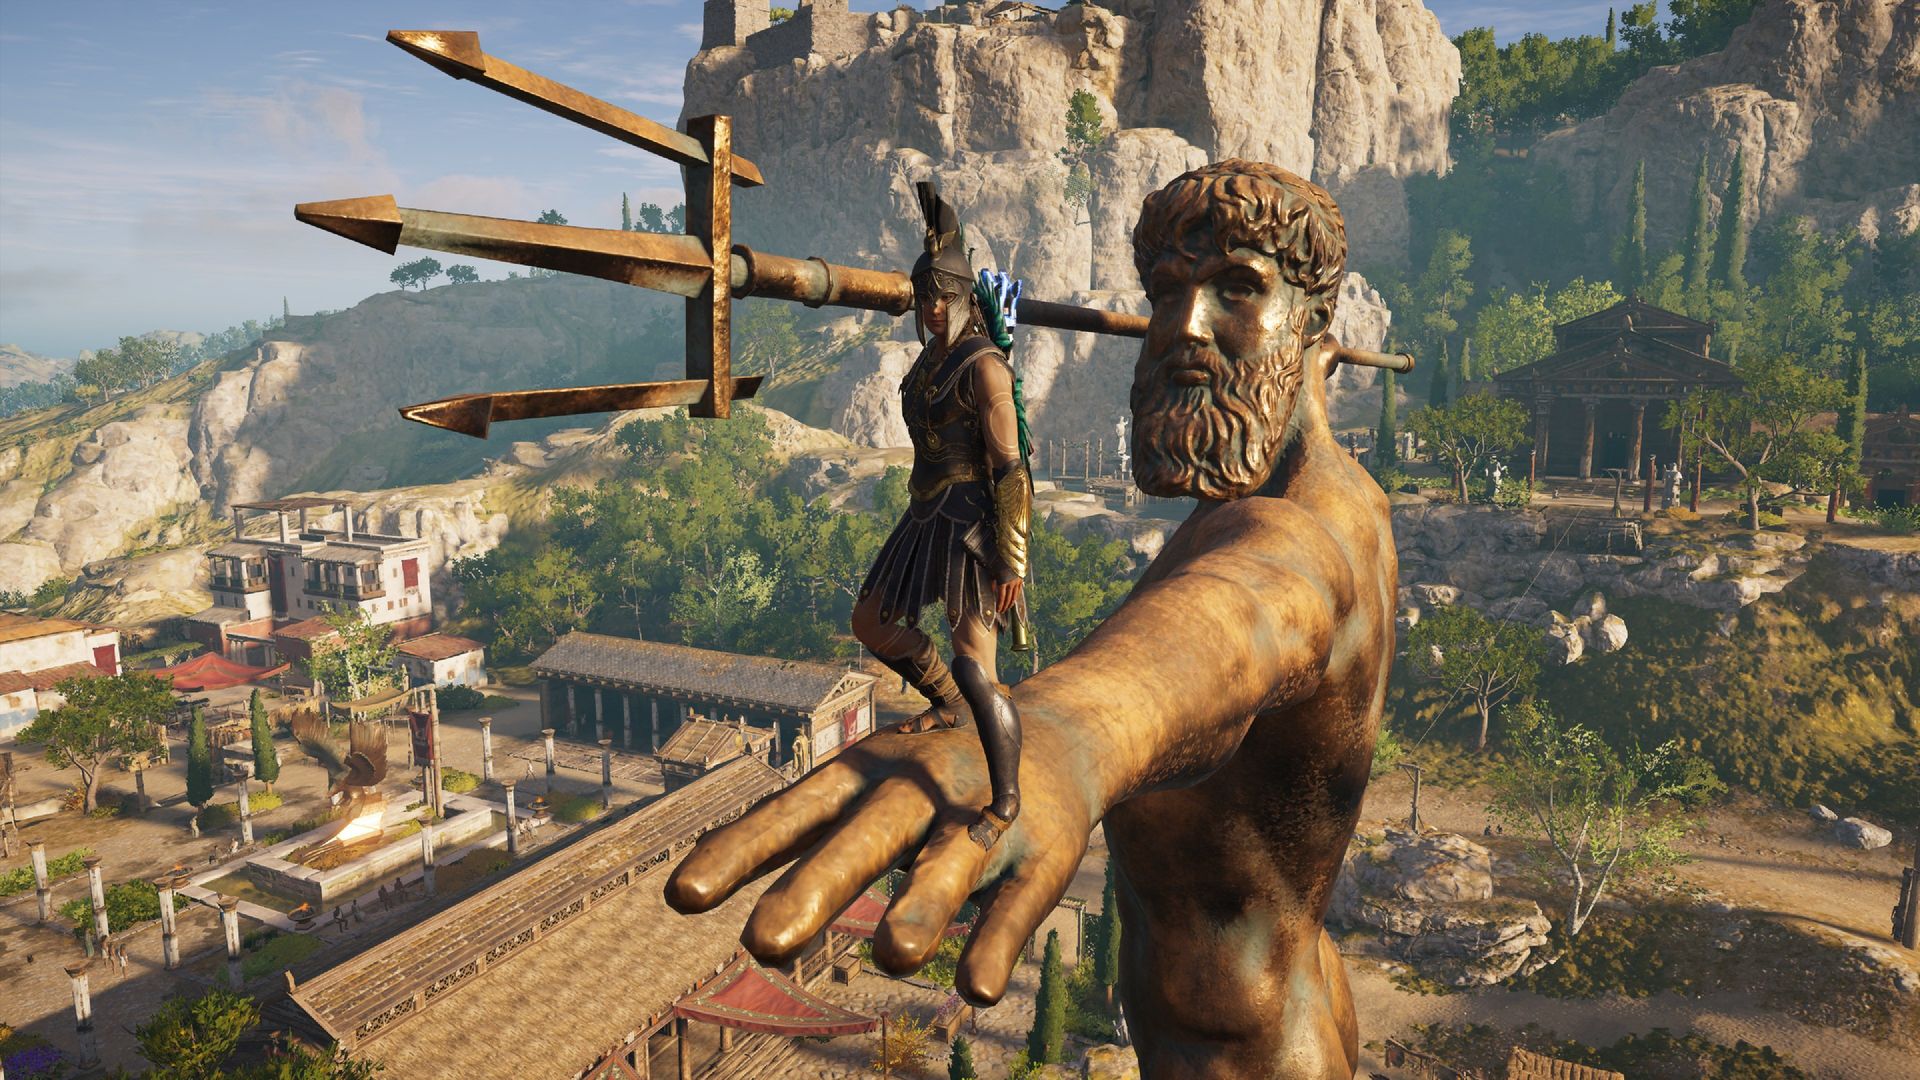 Screenshot of a warrior standing on a giant statue of Poseidon in Ancient Greece